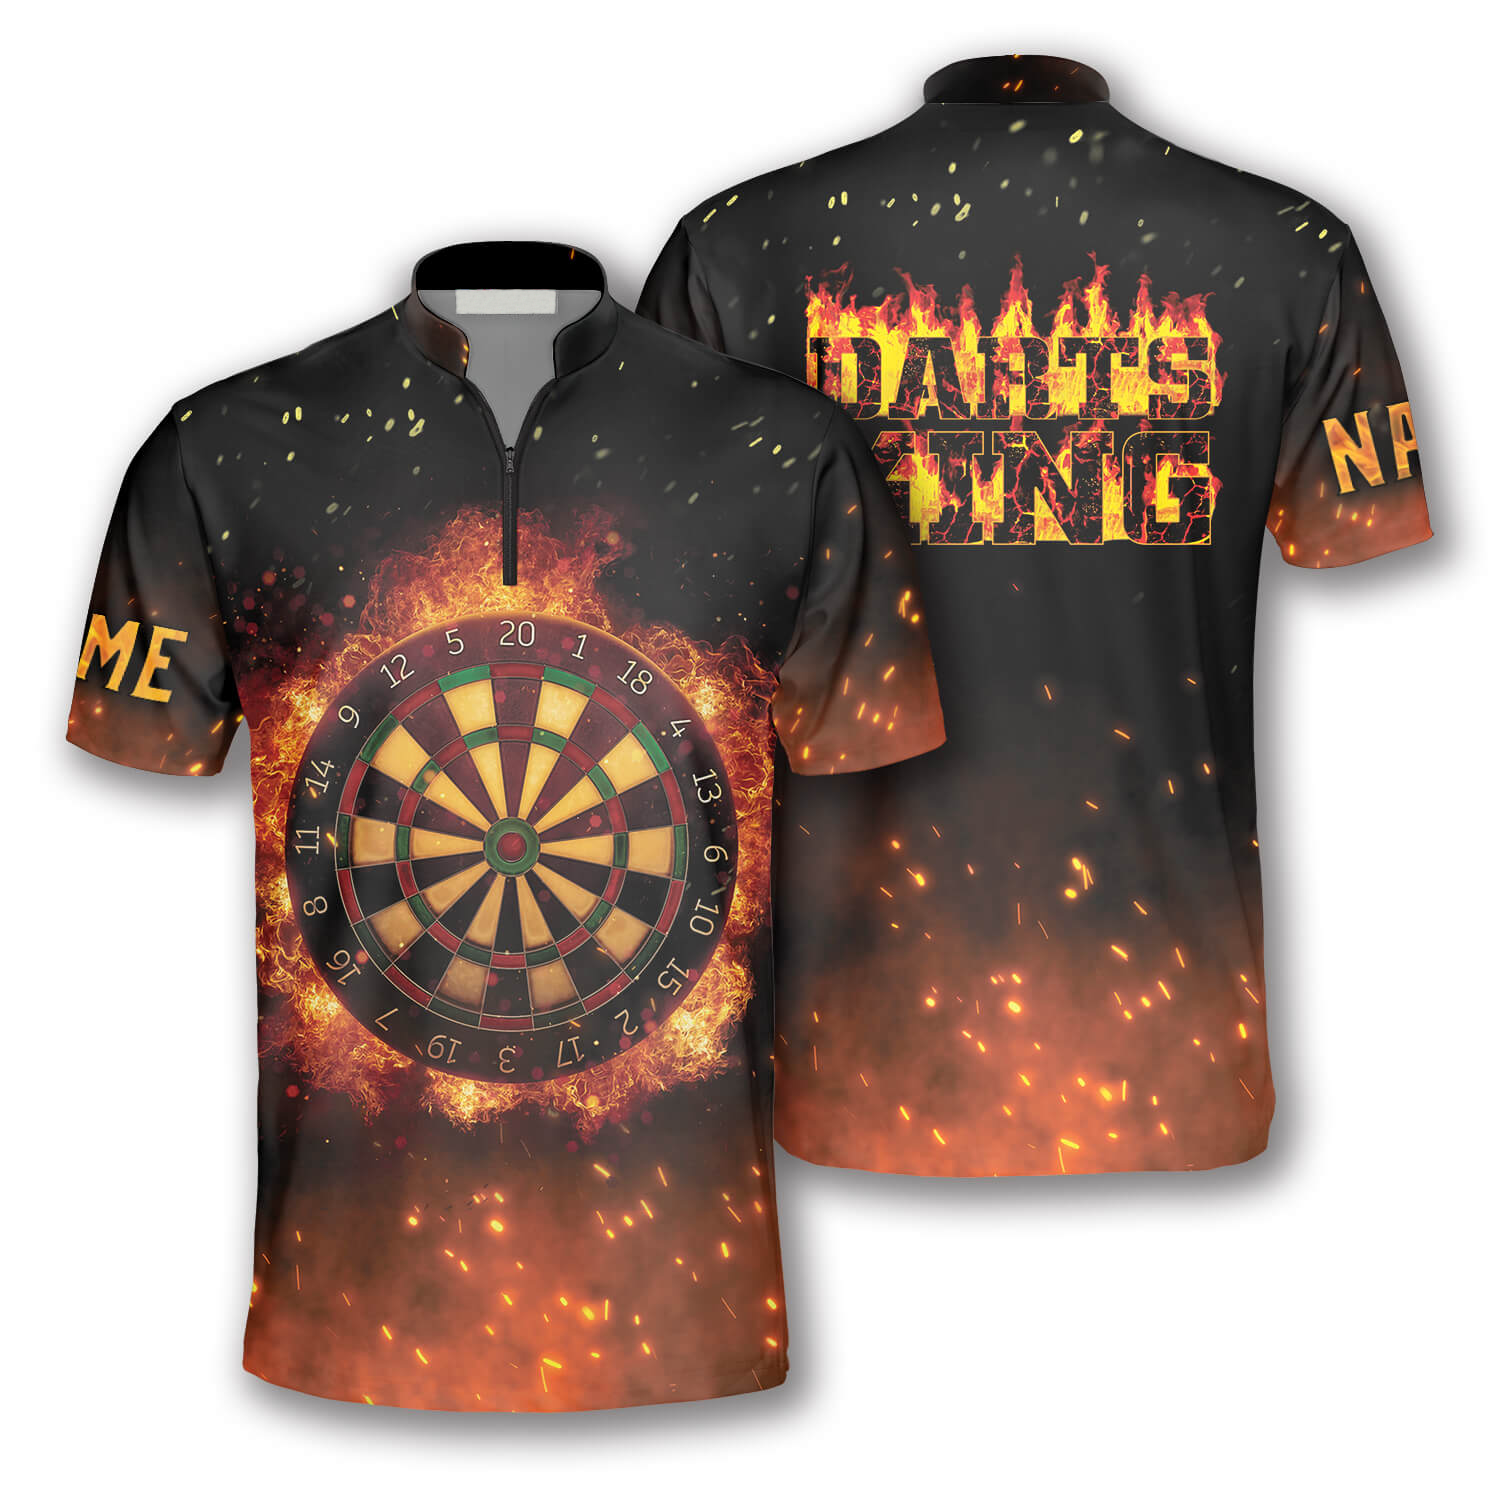 Personalized Name Darts King Fire Flame Custom Darts Jerseys for Men/ Idea Gift for Dart Player